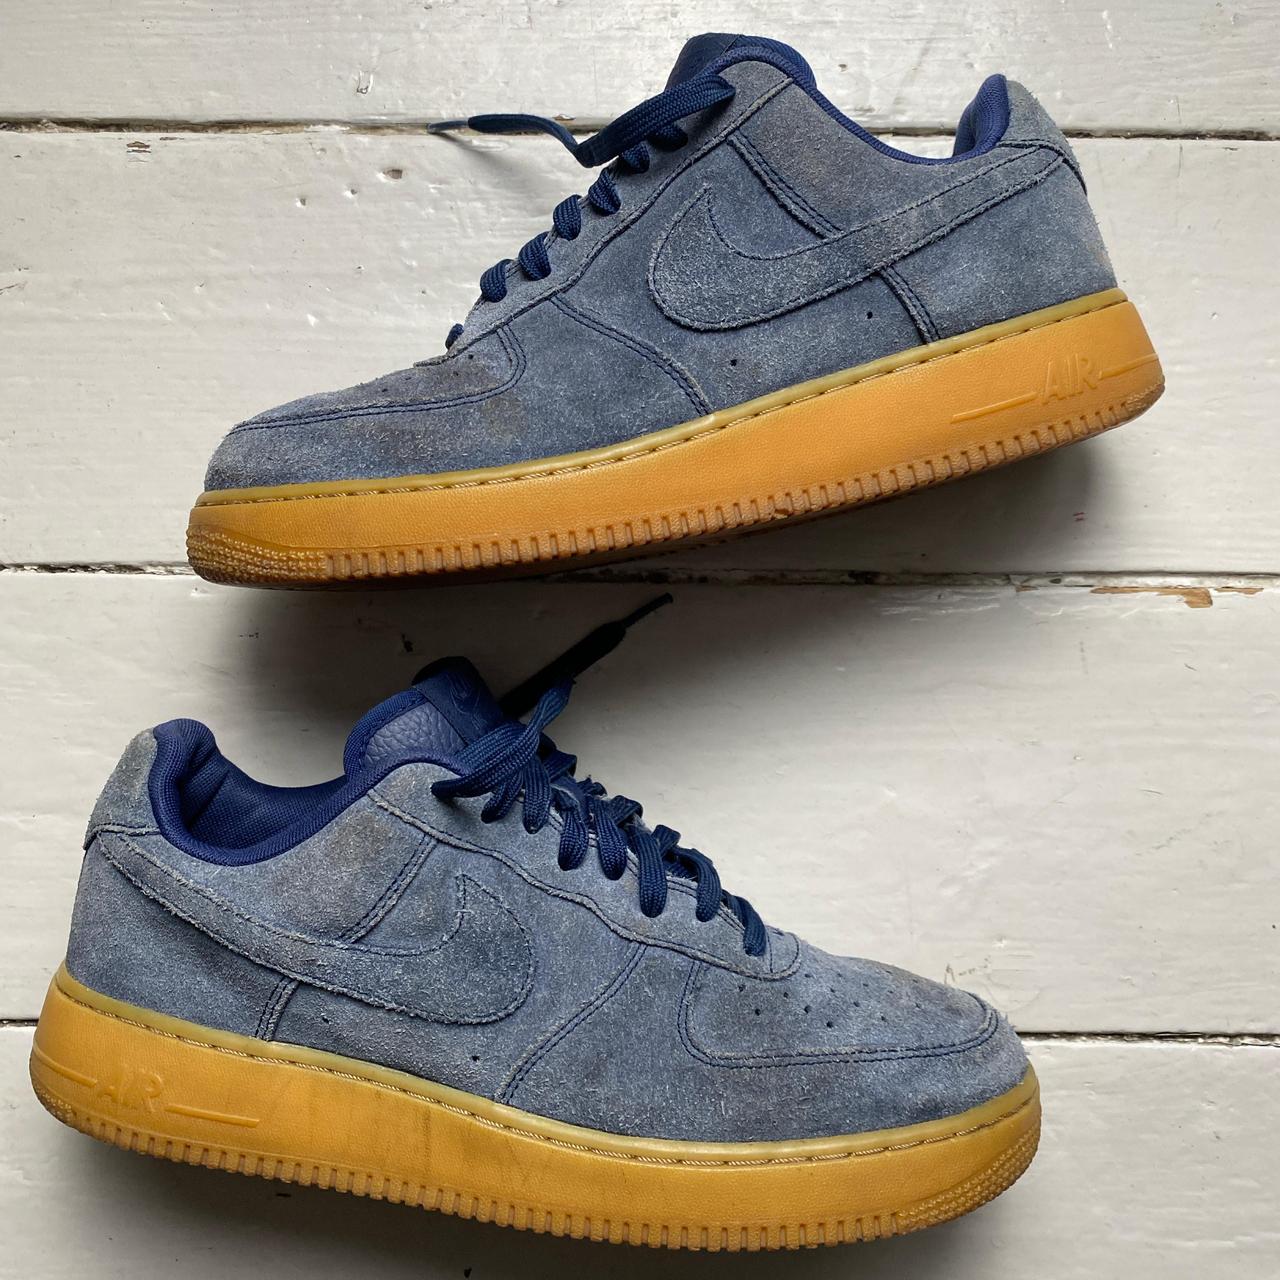 Nike Air Force 1 Navy Blue Suede and Gum Sole